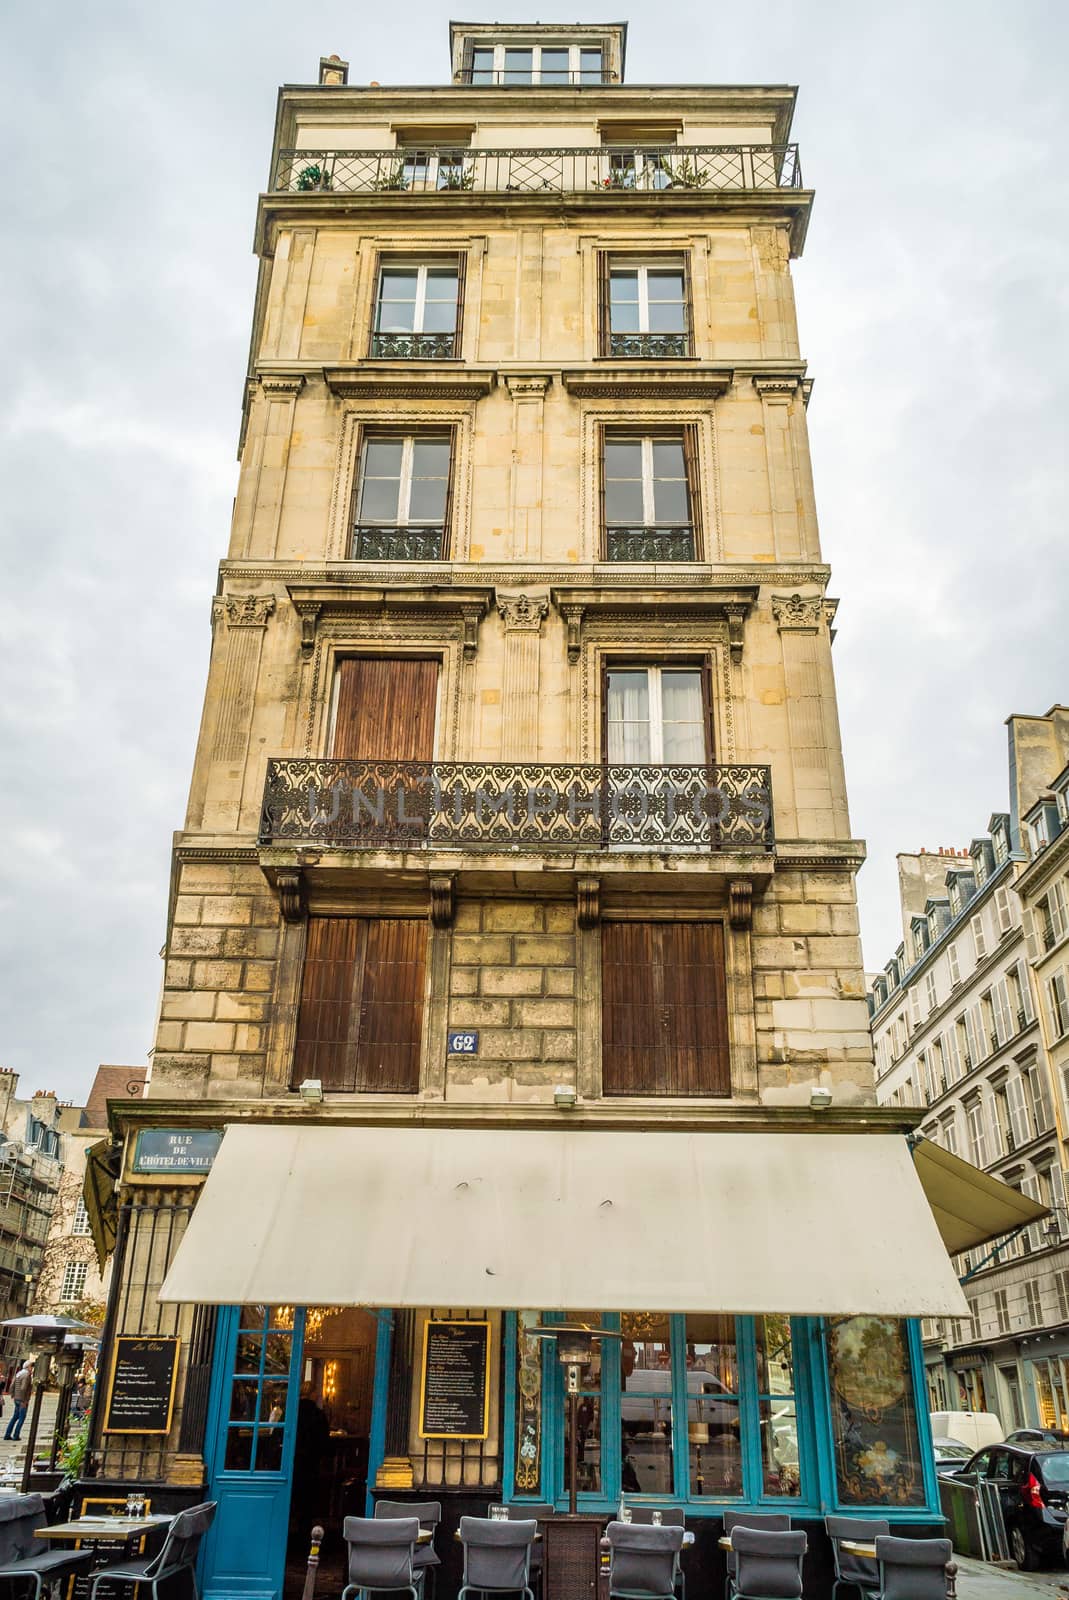 Typical parisian vertical house in Paris with restaurant on the first floor